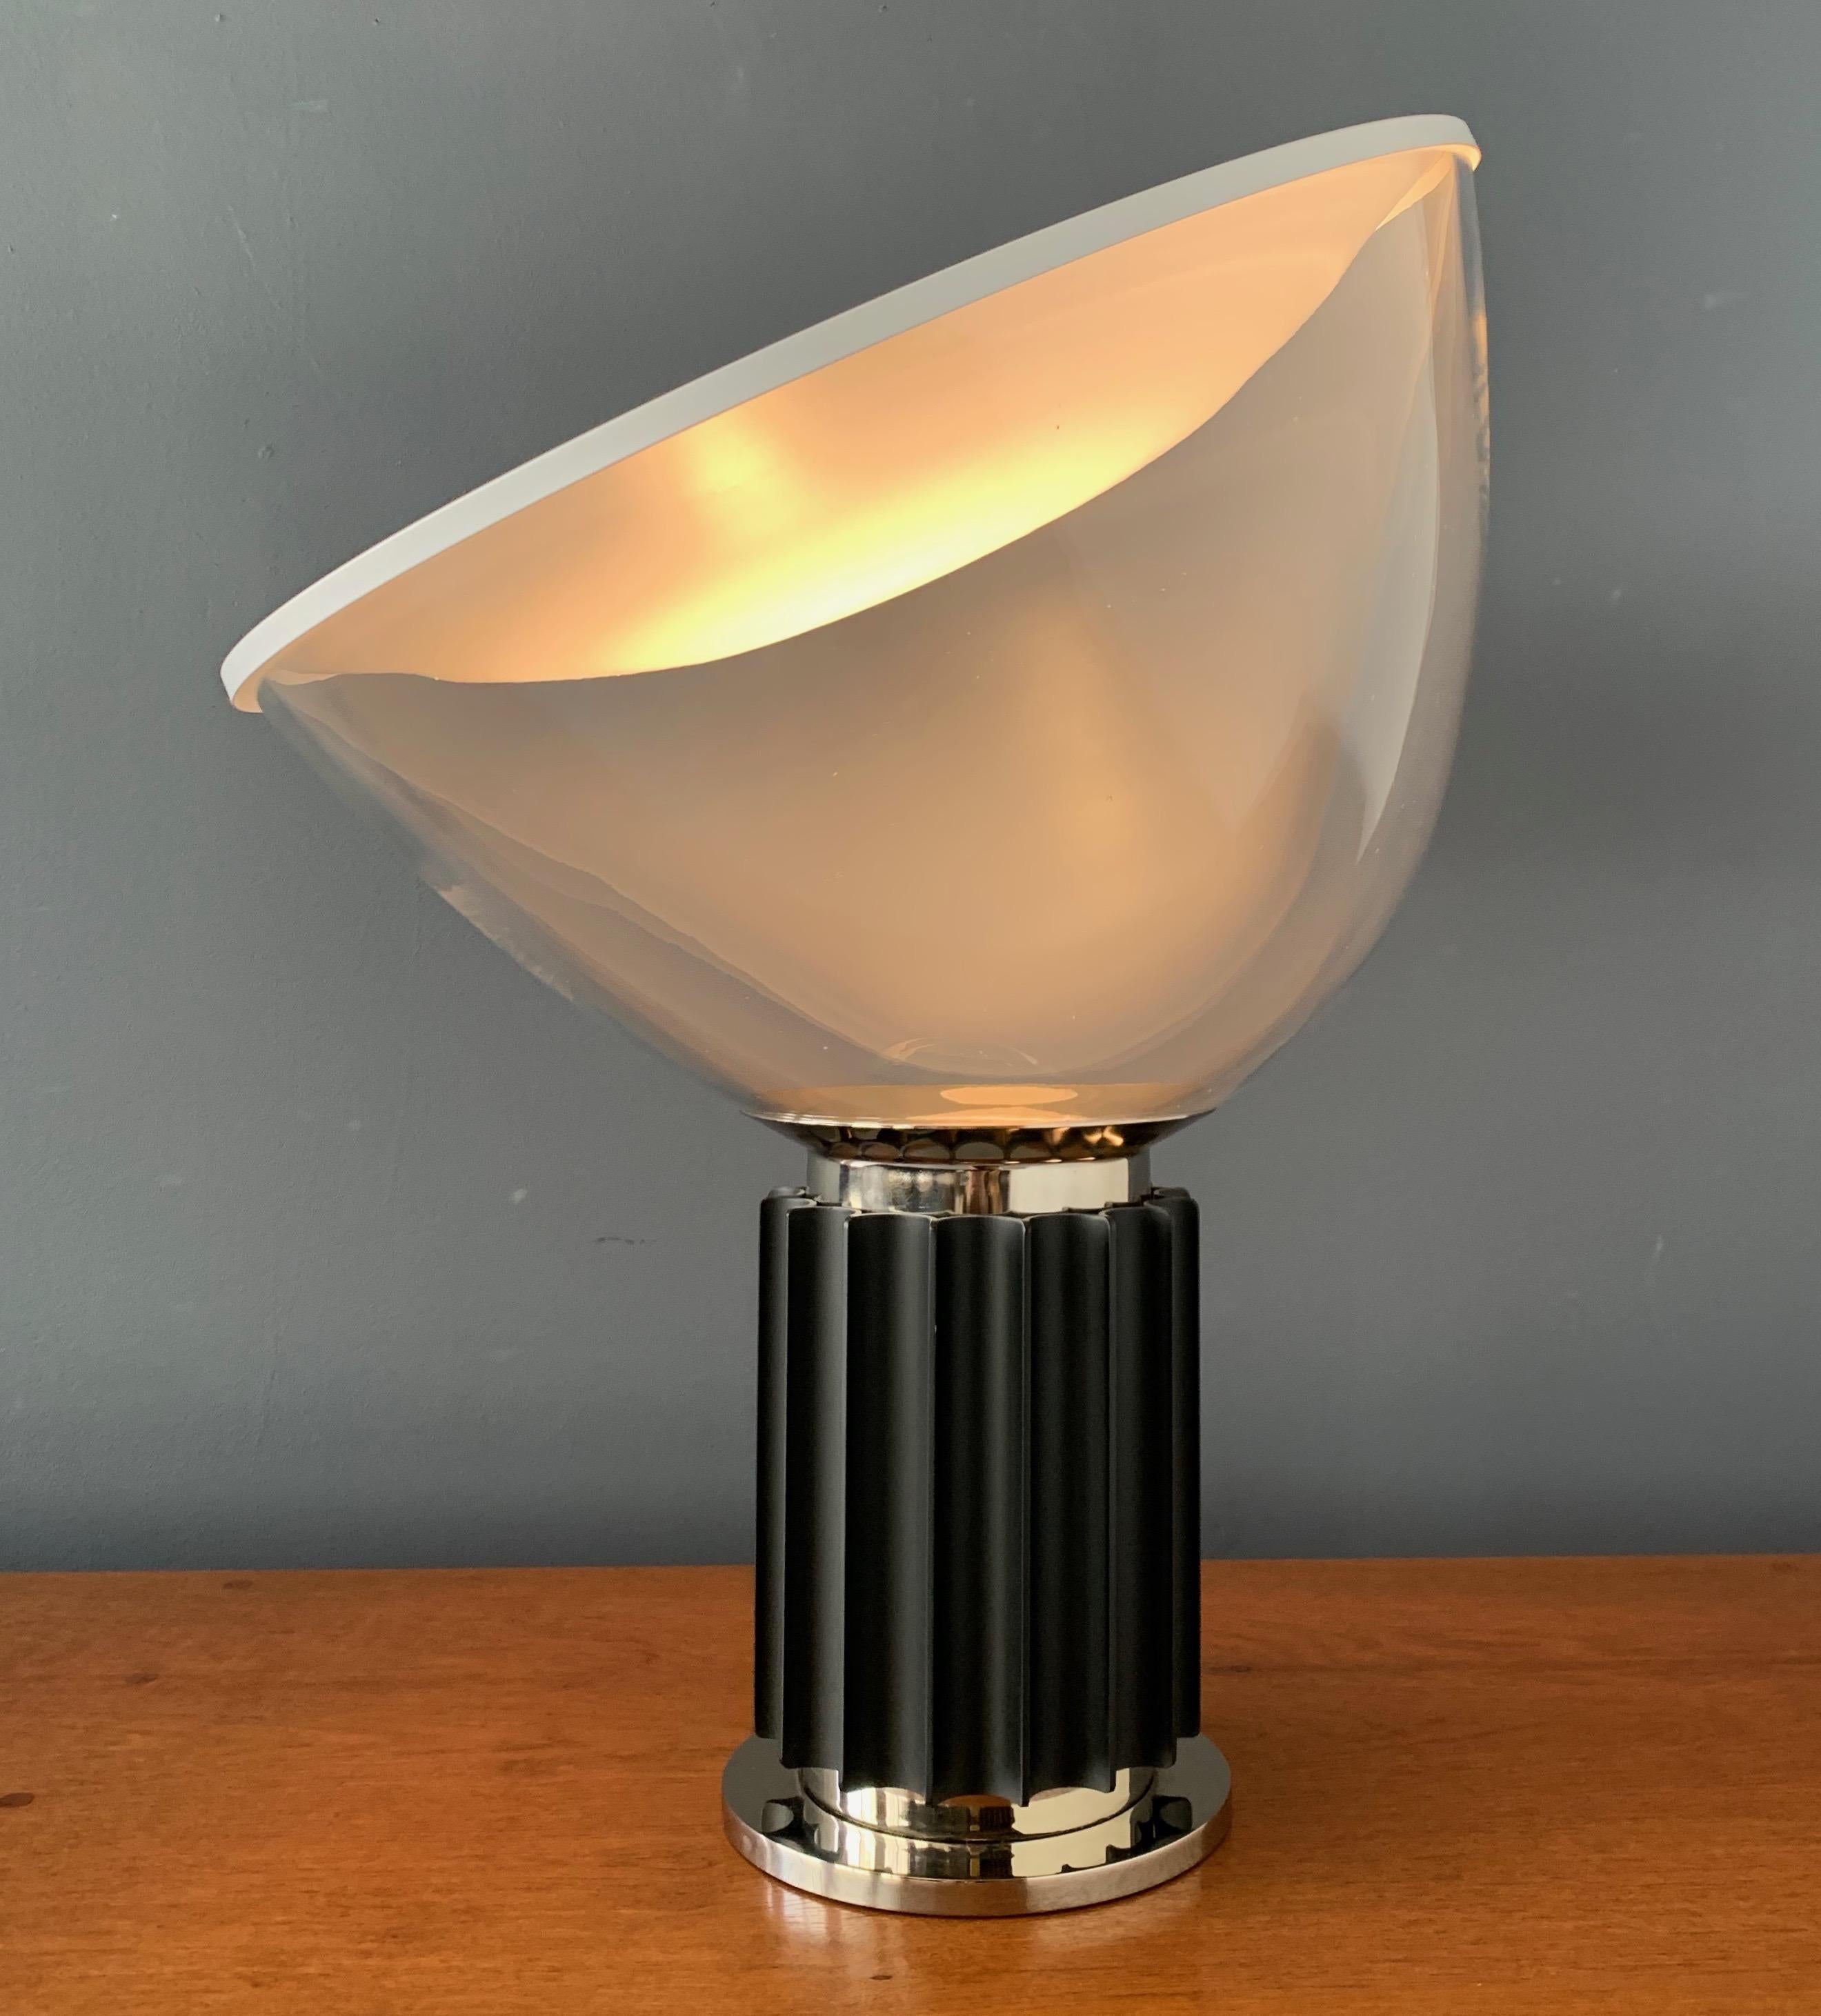 Taccia lamp by Pier Giacomo and Achille Castiglioni for Flos Italy. The lamp is in exceptional original condition. The blown glass shade can pivot upon the metal base fixture to create different lighting effects. From the 1970s-1980s production.
  